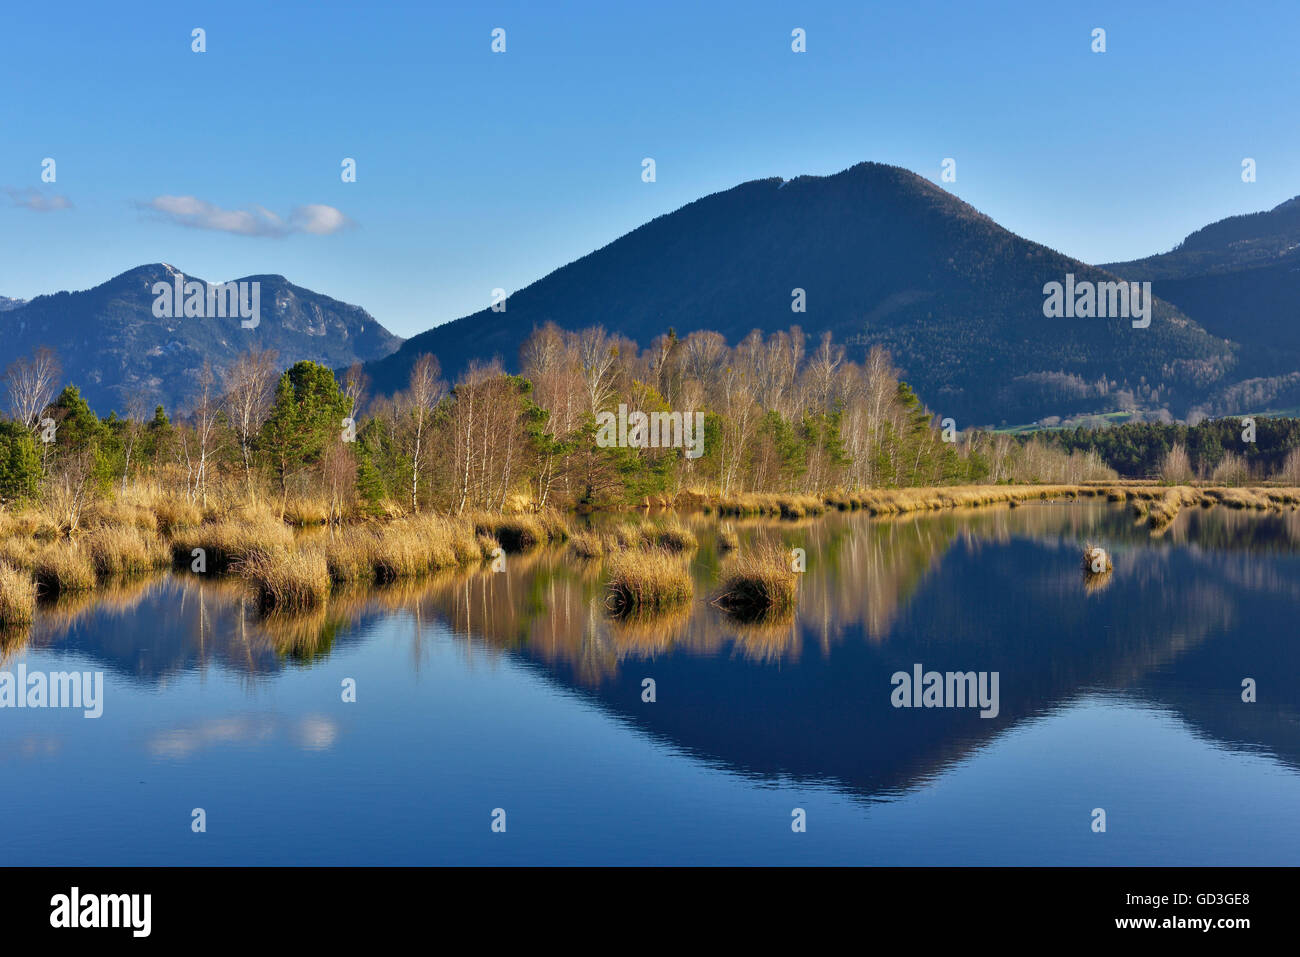 Reflection in moor pond, Flyschberge, Wendelstein, Mangfall Mountains, near Raubling, Alpine foothills, Bavaria, Germany Stock Photo